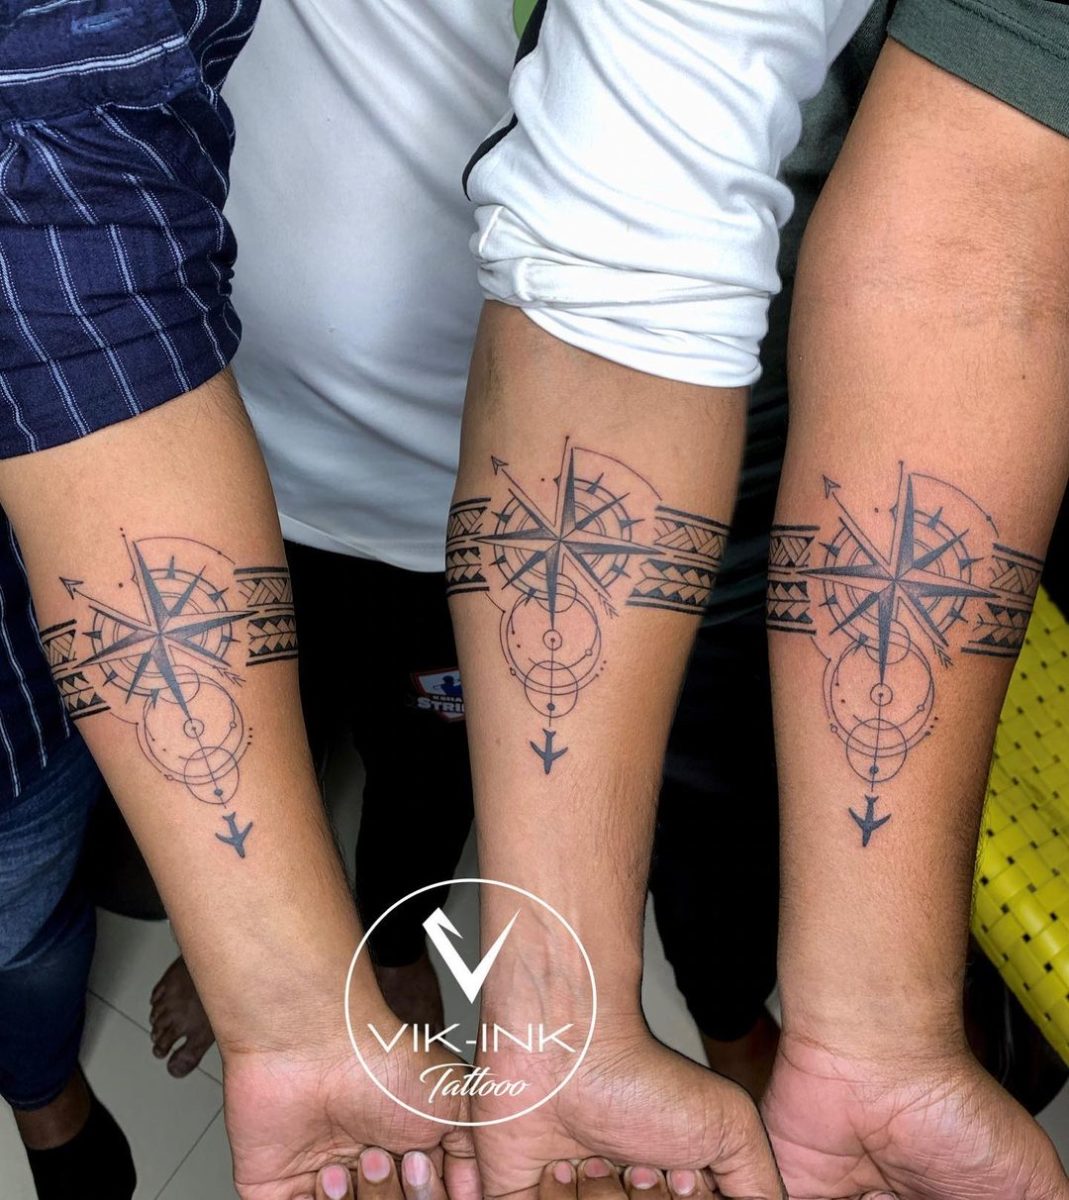 20 Magical Map Tattoos for Adventure Lovers | Chart a new path with these mesmerizing map tattoos.